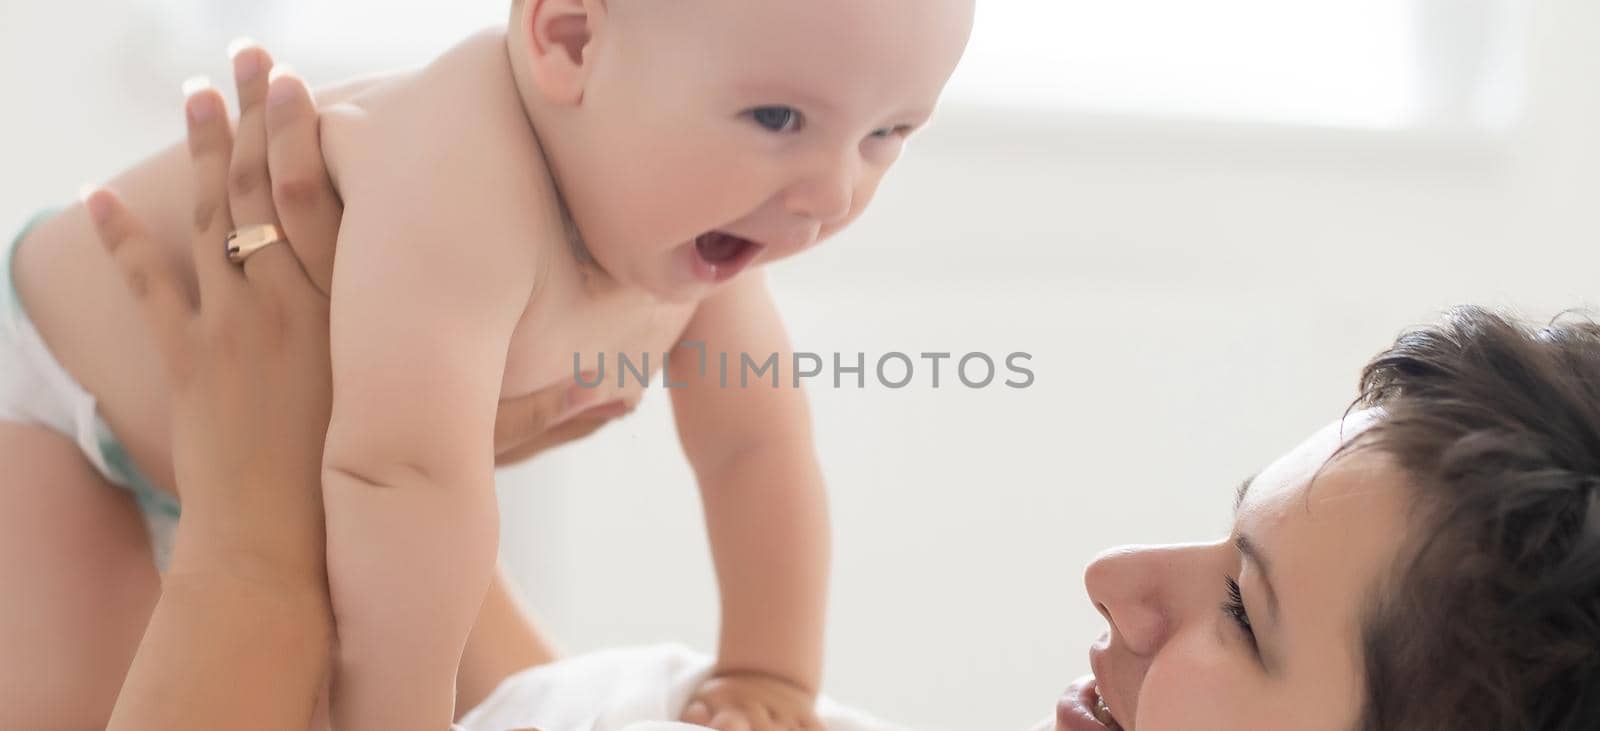 happy family. Mother and baby playing and smiling on bed.